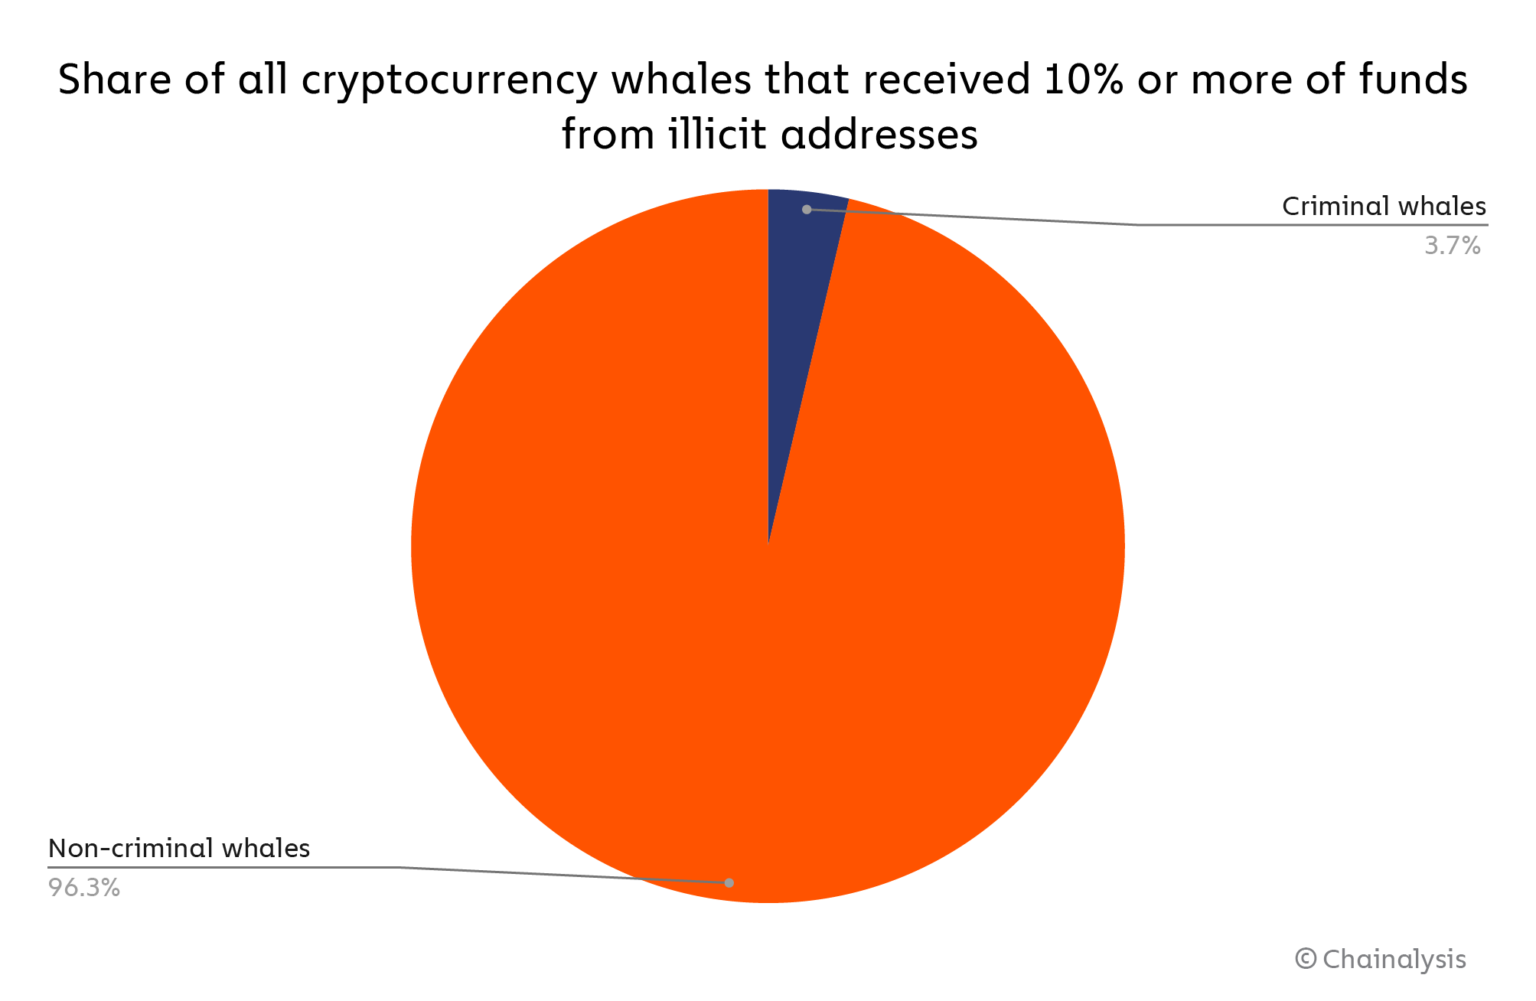 Chainalysis Study Shows 'Criminal Whales' Hold $25B in Digital Assets, Entities Represent 3.7% of All Crypto Whales